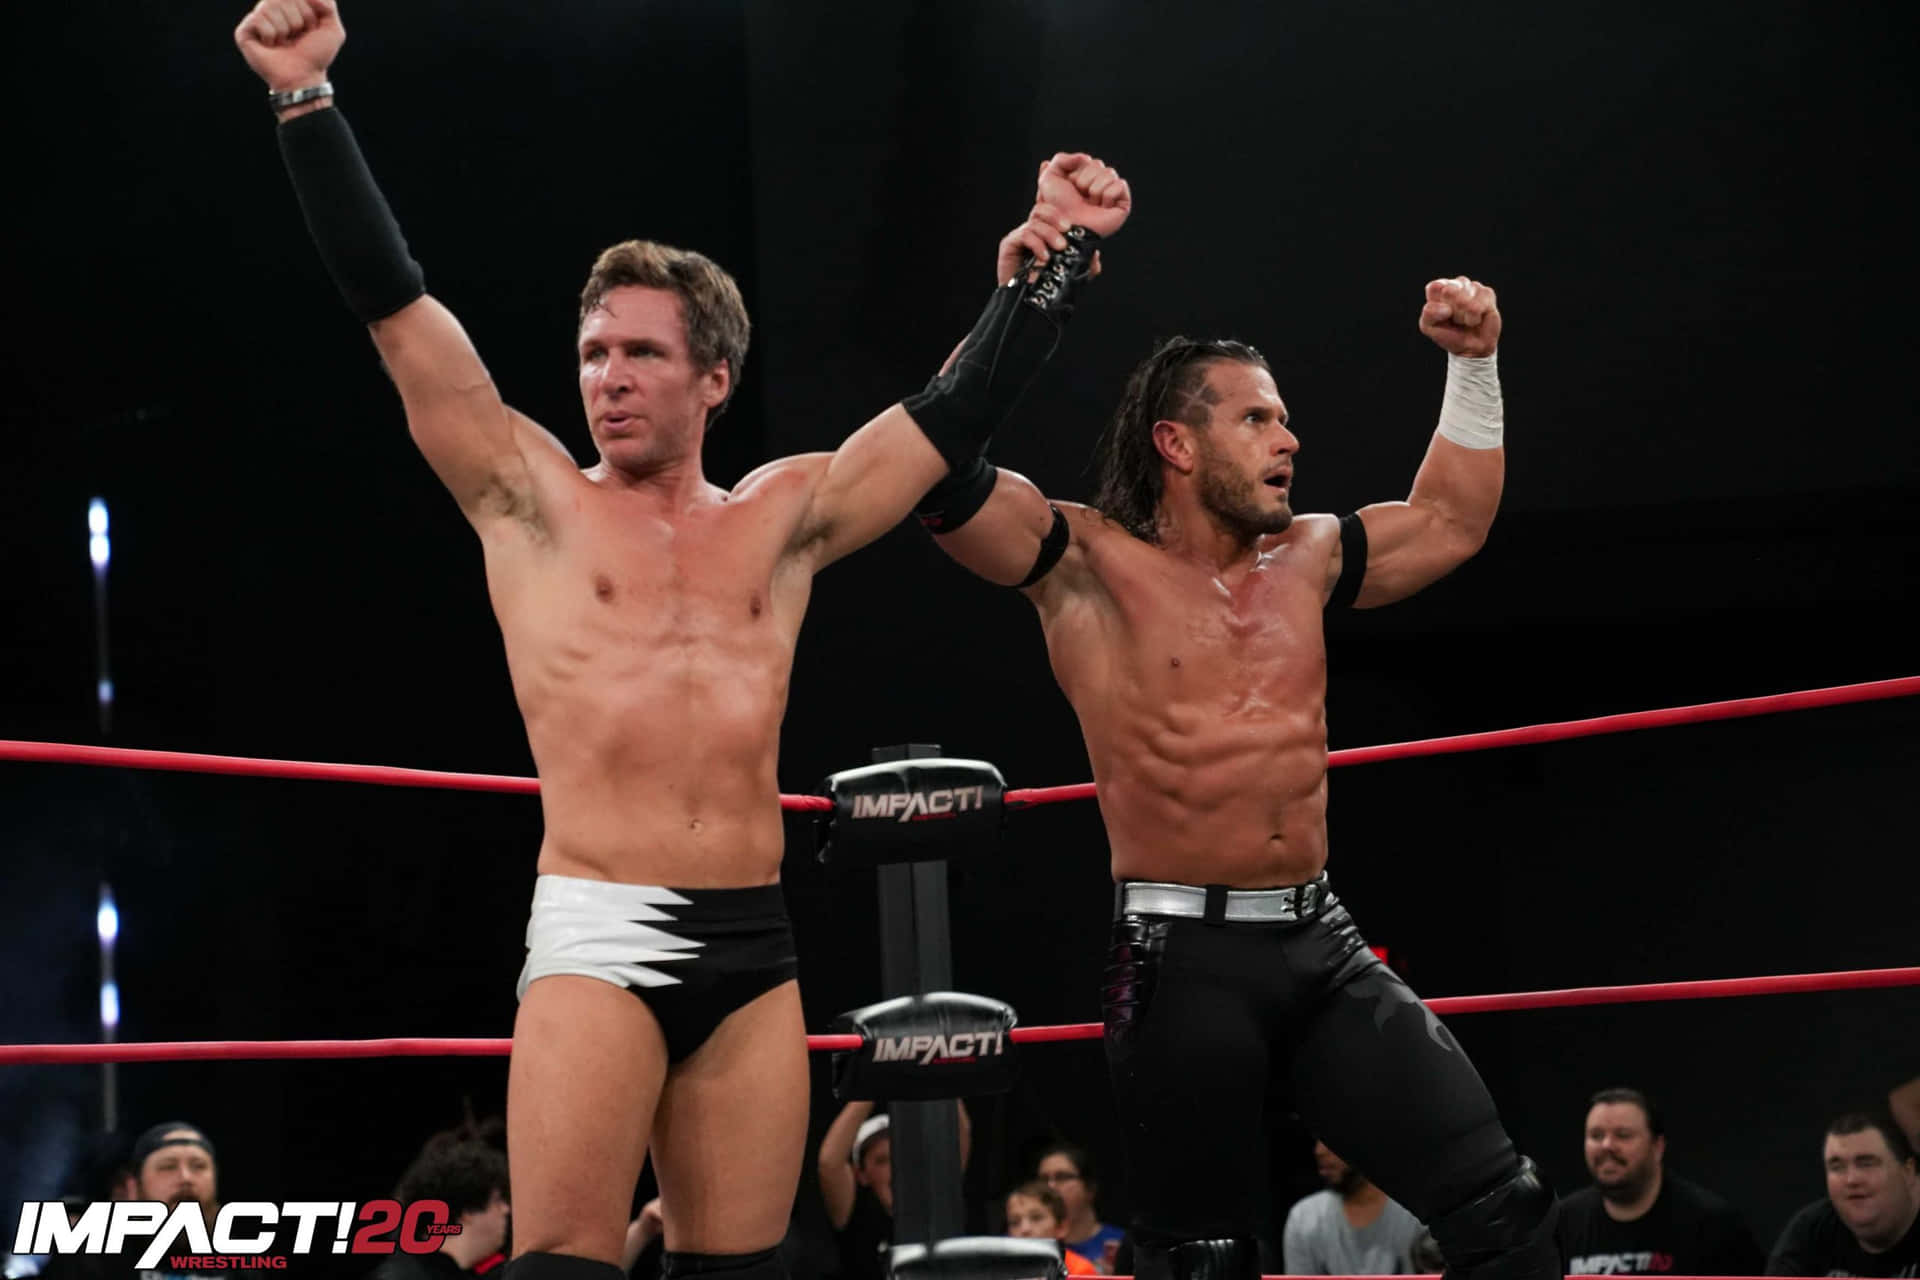 Alex Shelley and Chris Sabin in a moment from Impact Wrestling Wallpaper